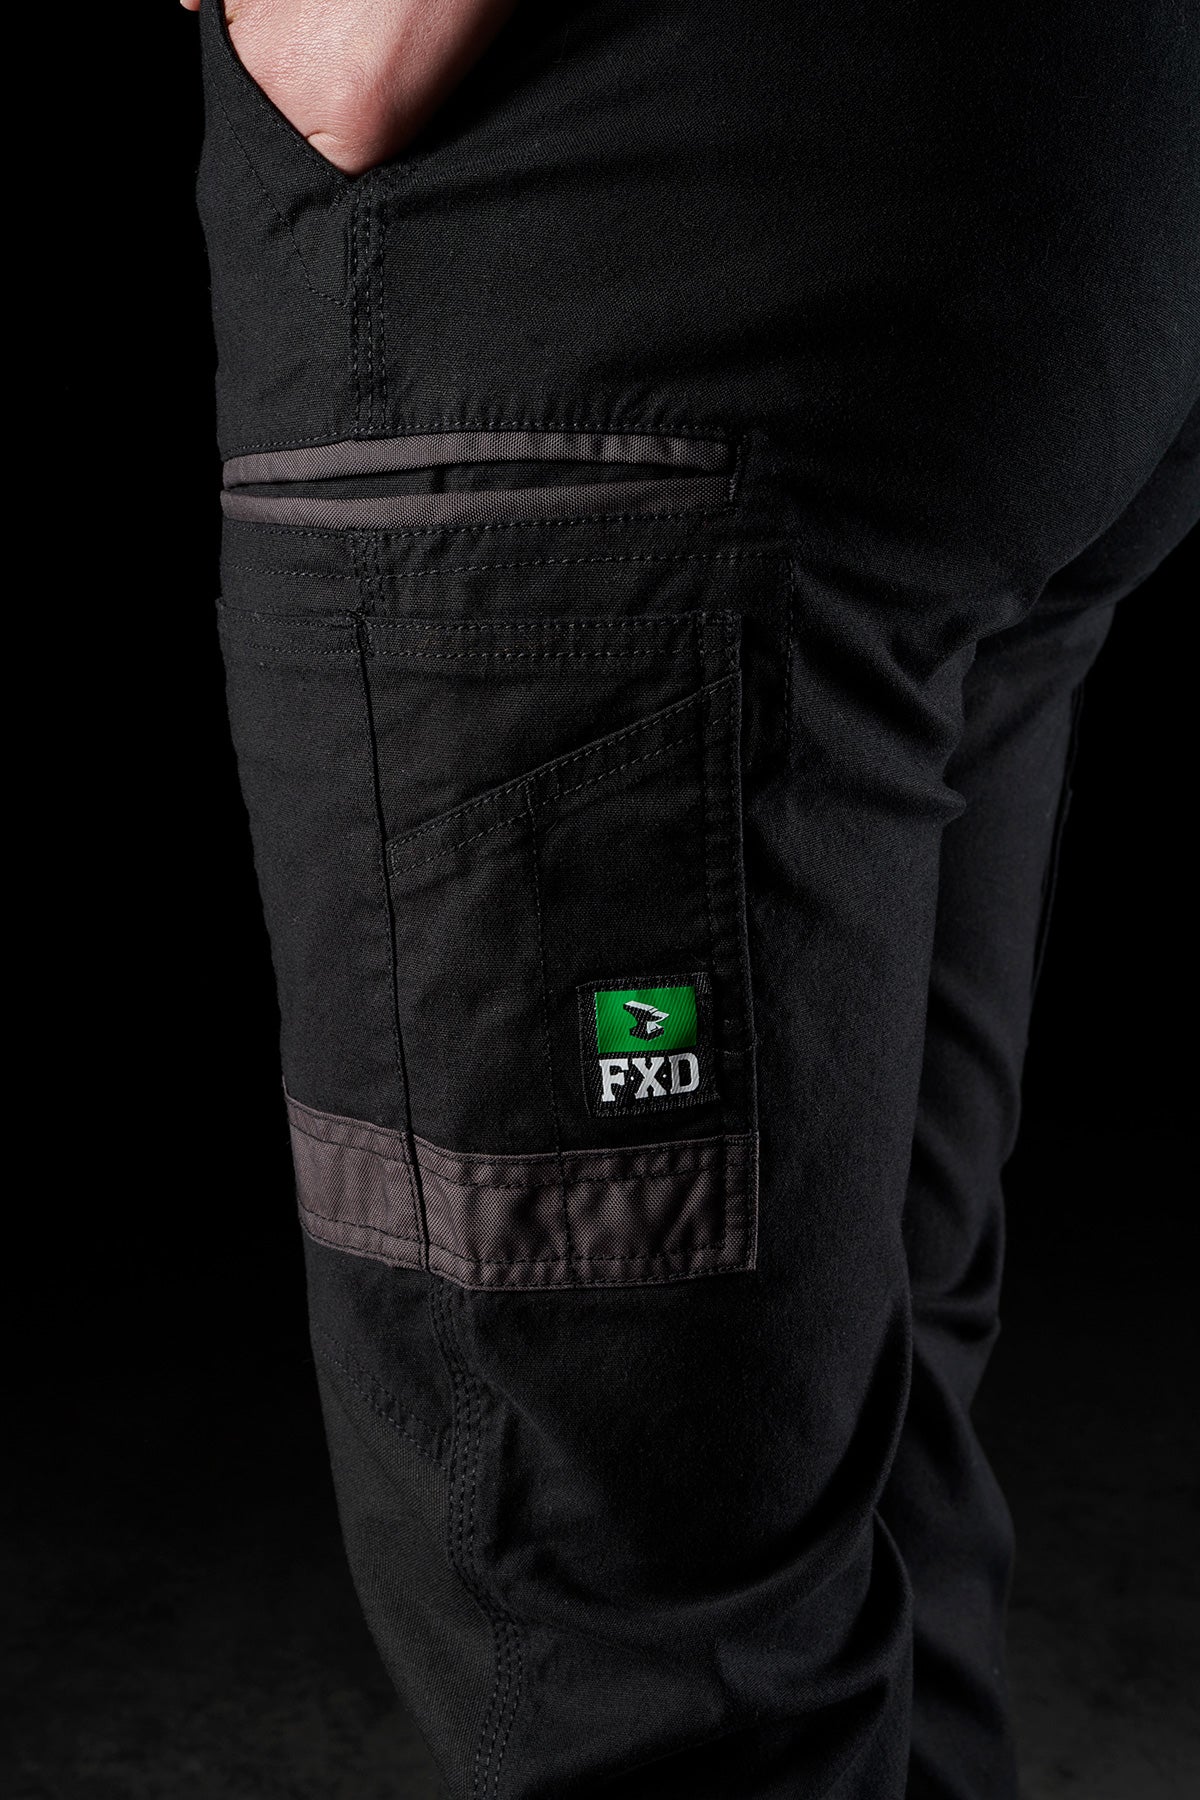 NEW RELEASE ALERT – FXD WOMENS WP.9WT REFLECTIVE TAPED WORK